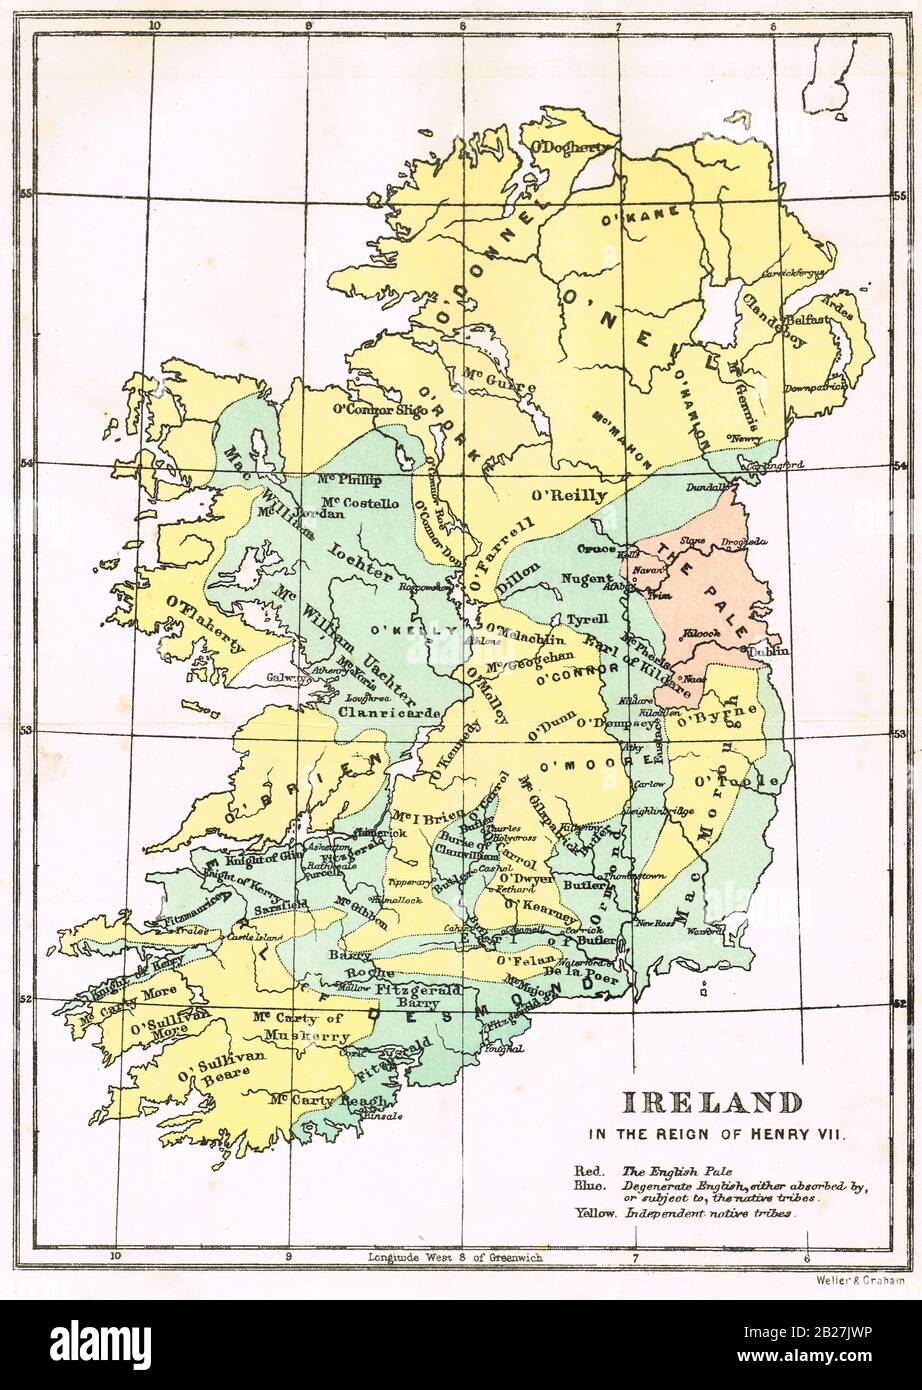 Map of Ireland,in the reign of Henry VII, showing the English Pale, Degenerate English, and independent native tribes Stock Photo